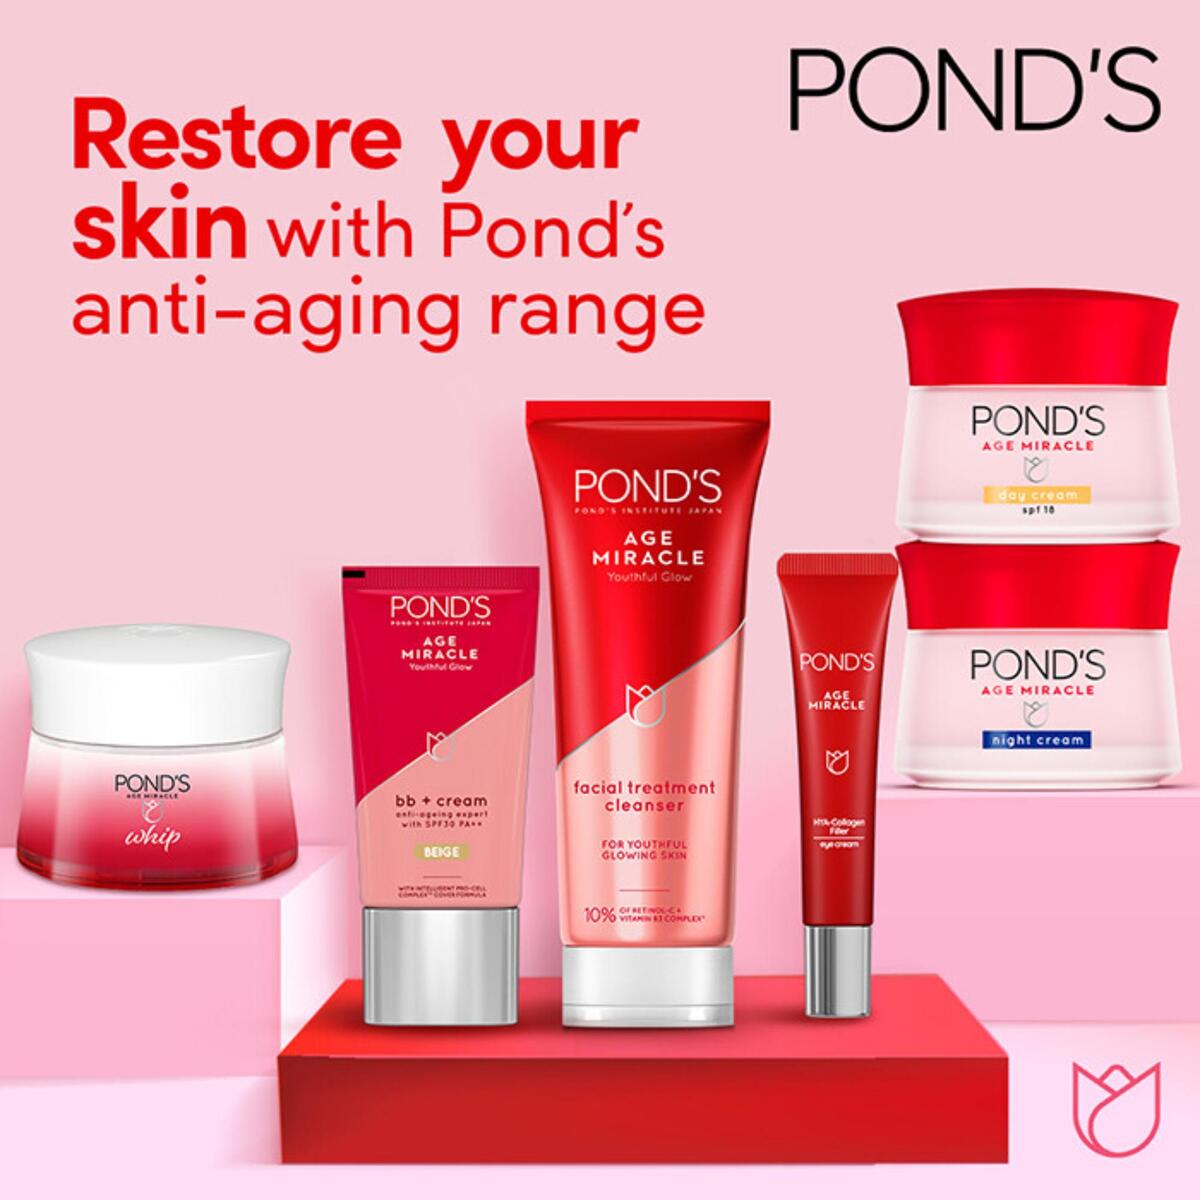 Pond's Age Miracle Day Cream SPF 18 50 g